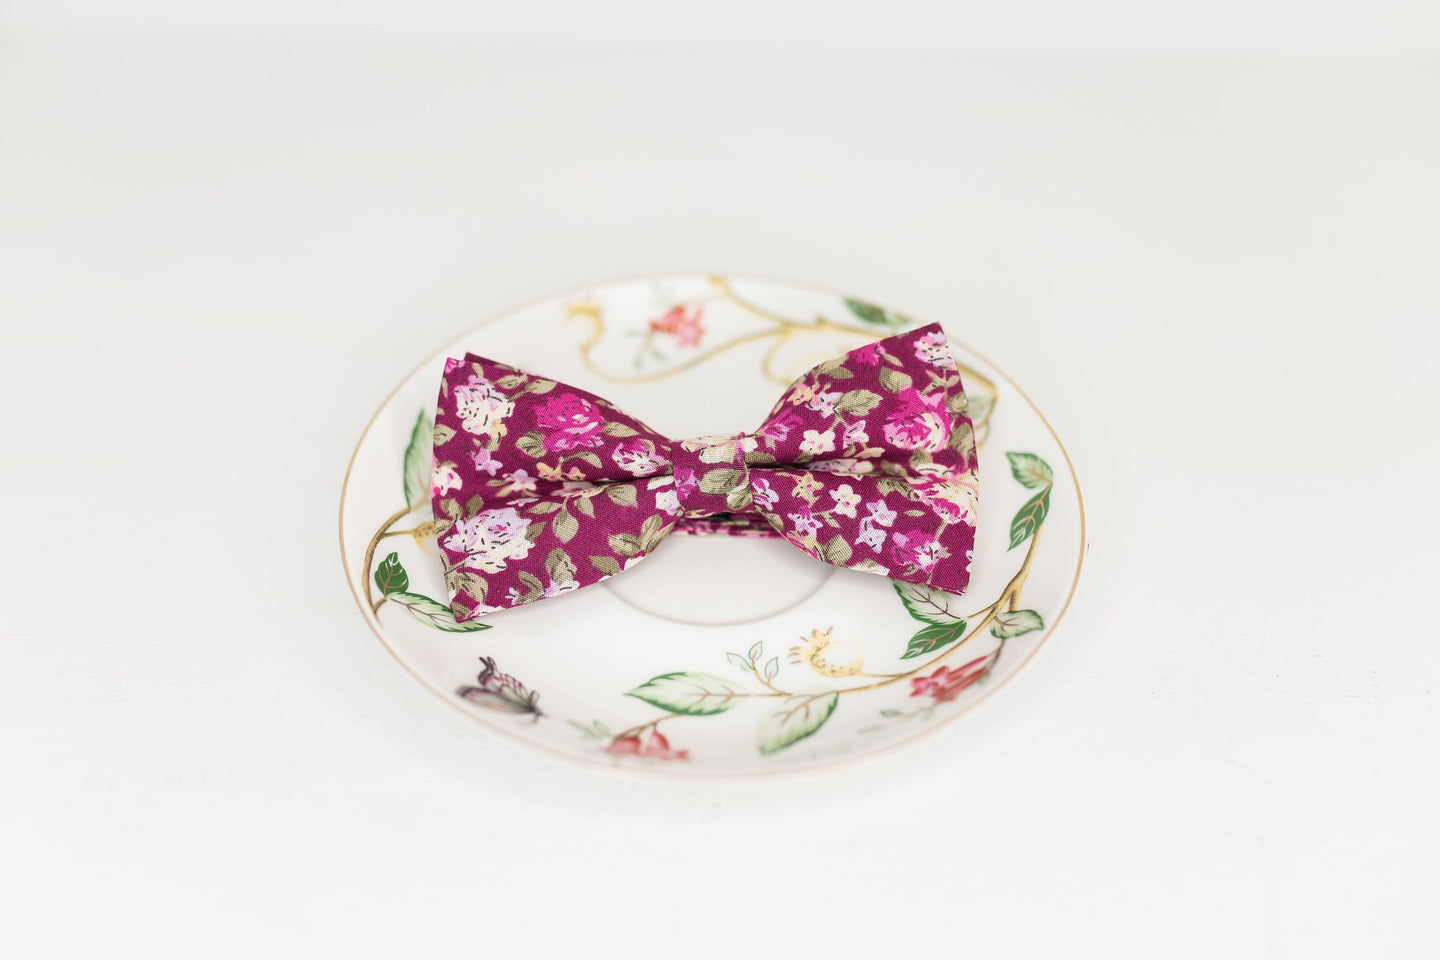 Merlot Pink and White Rose Bow Tie